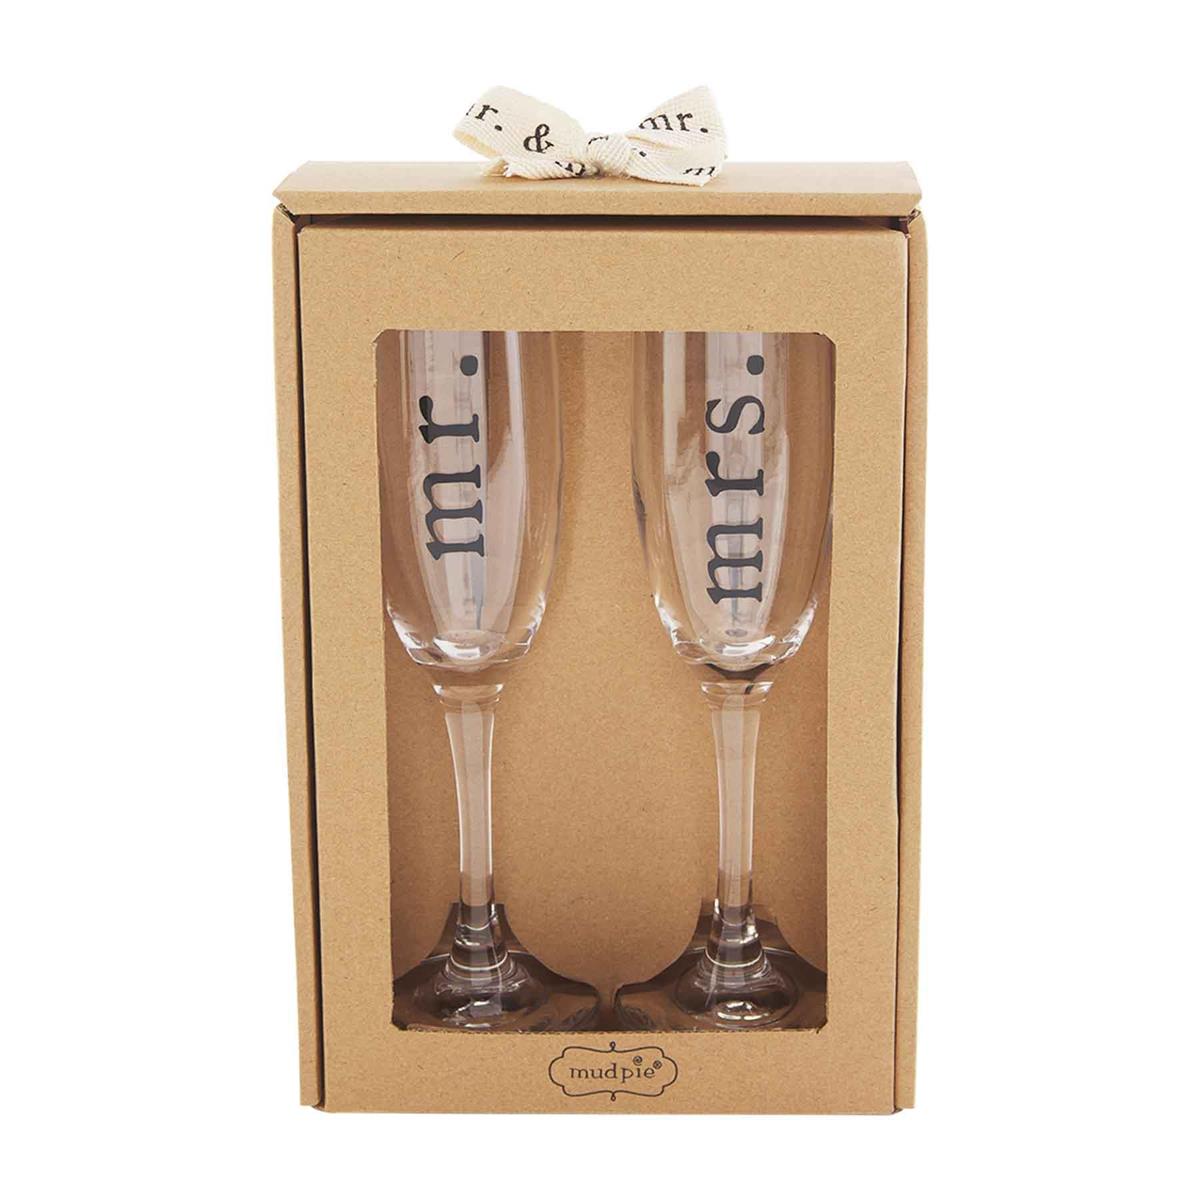 A set of Champagne Flue glasses that read Mr. and Mrs.